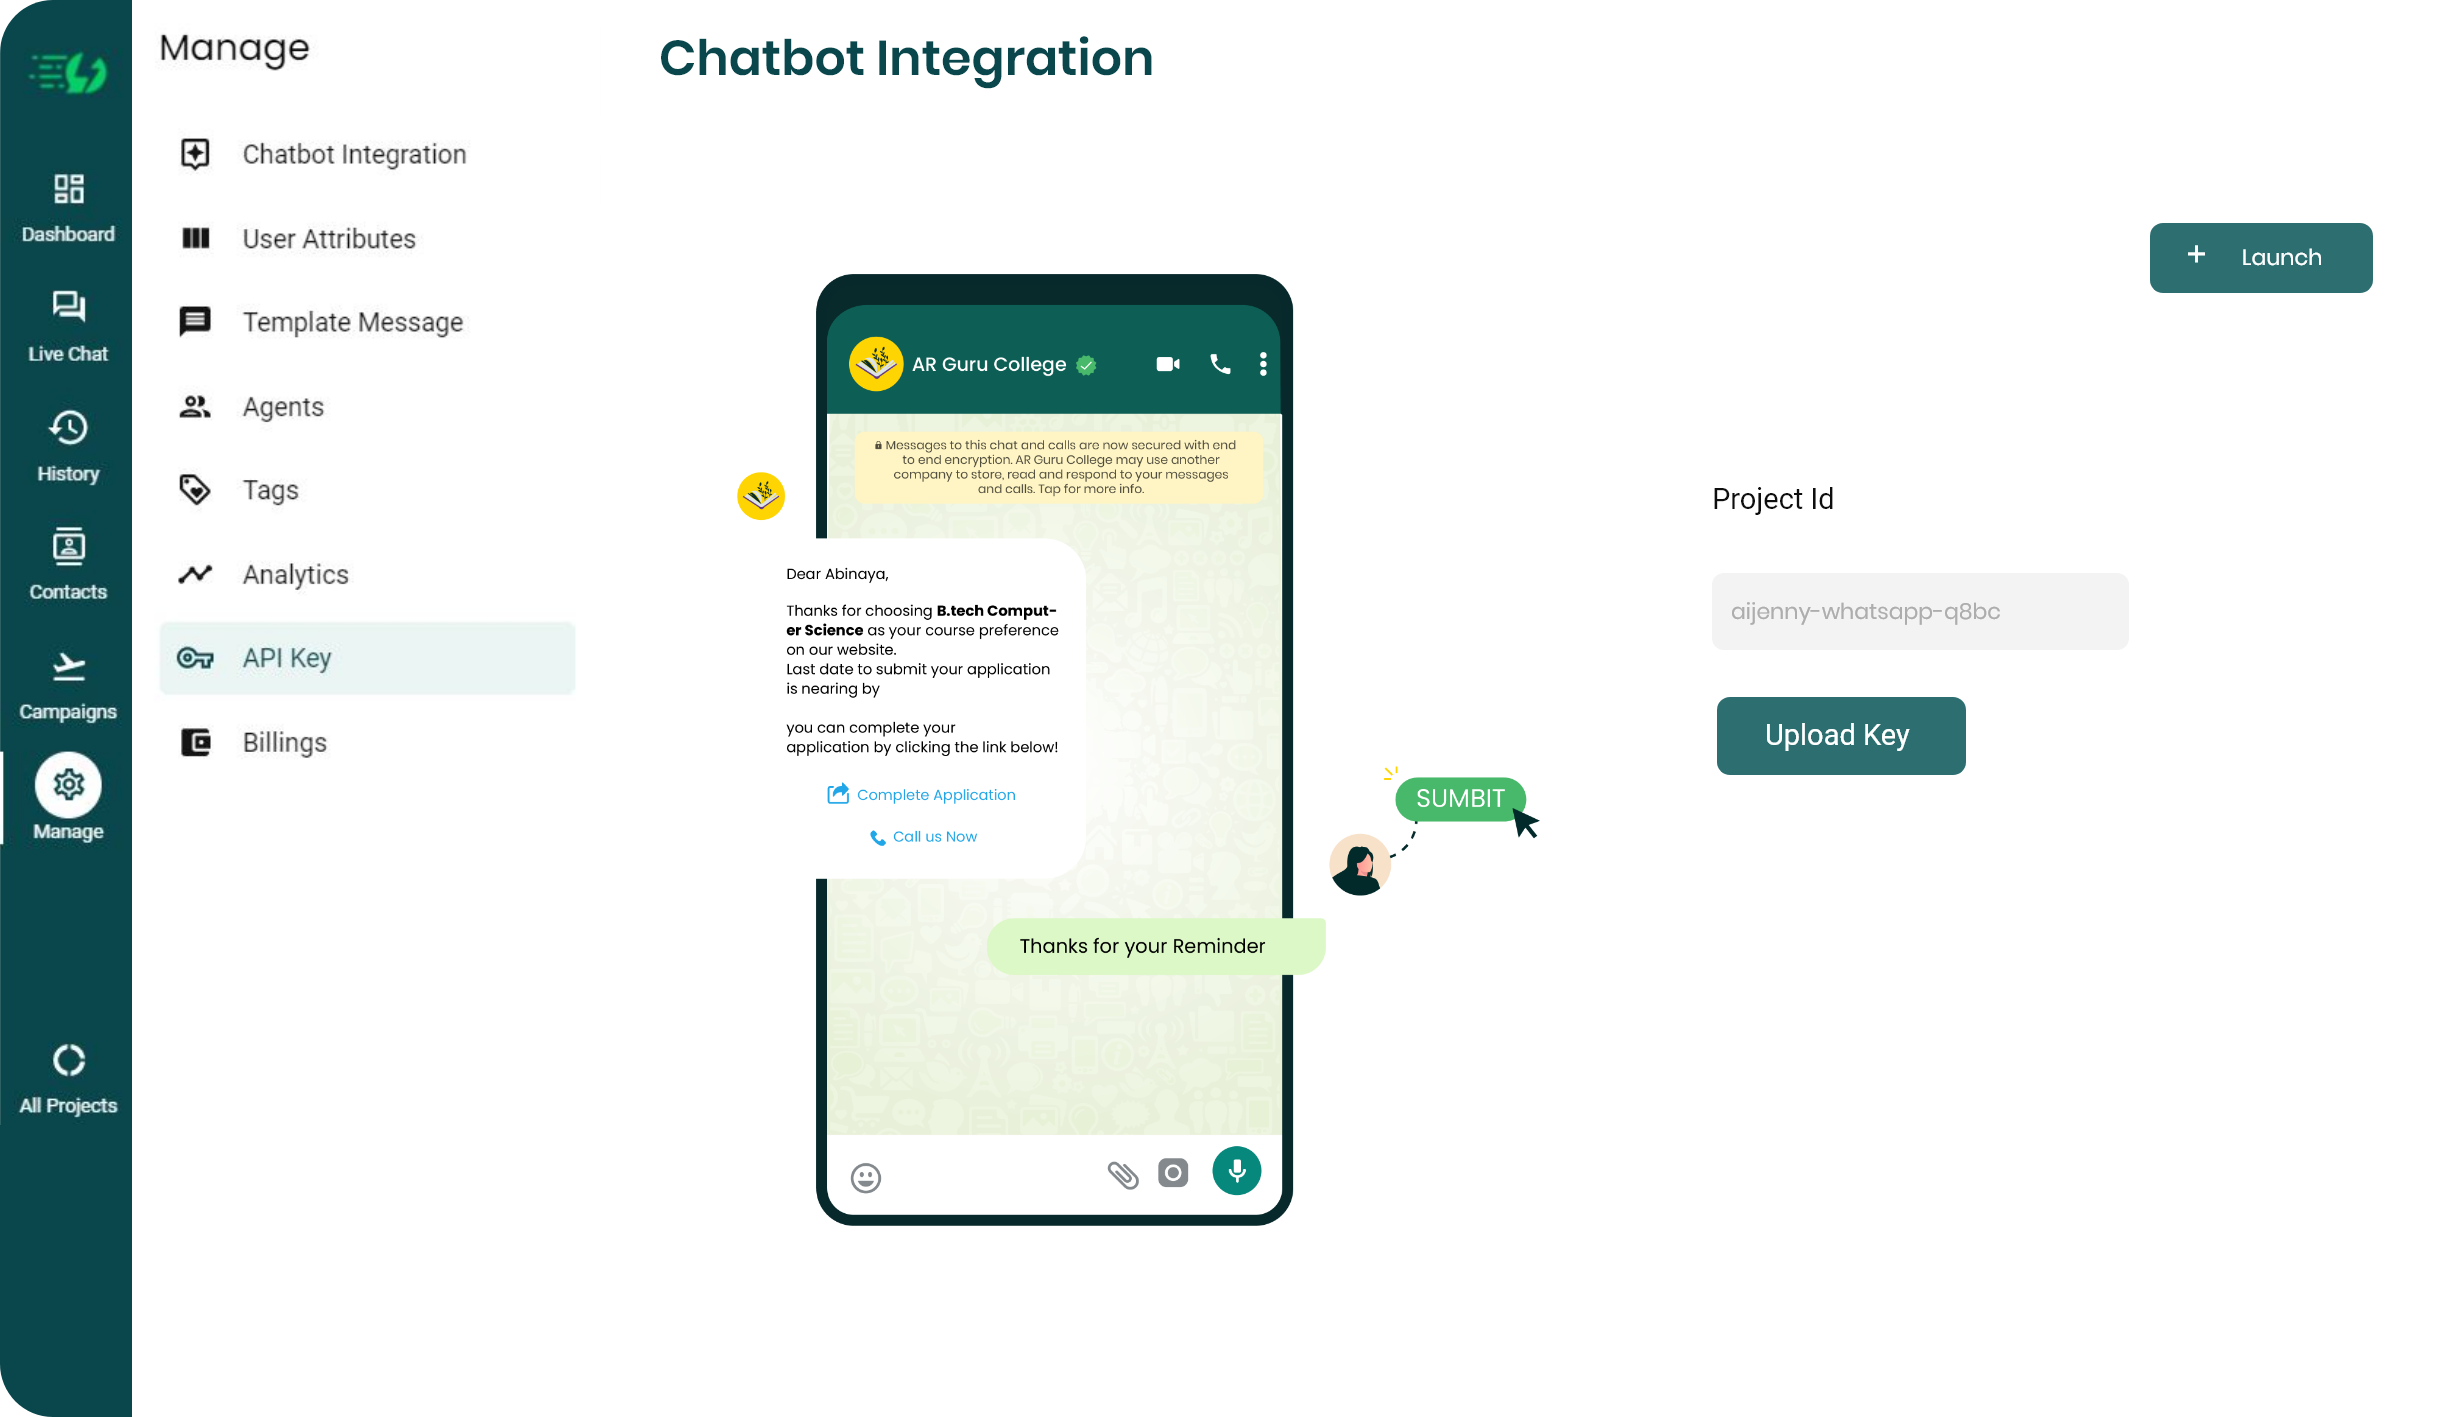 WhatsApp Chatbot Integration Use Case example